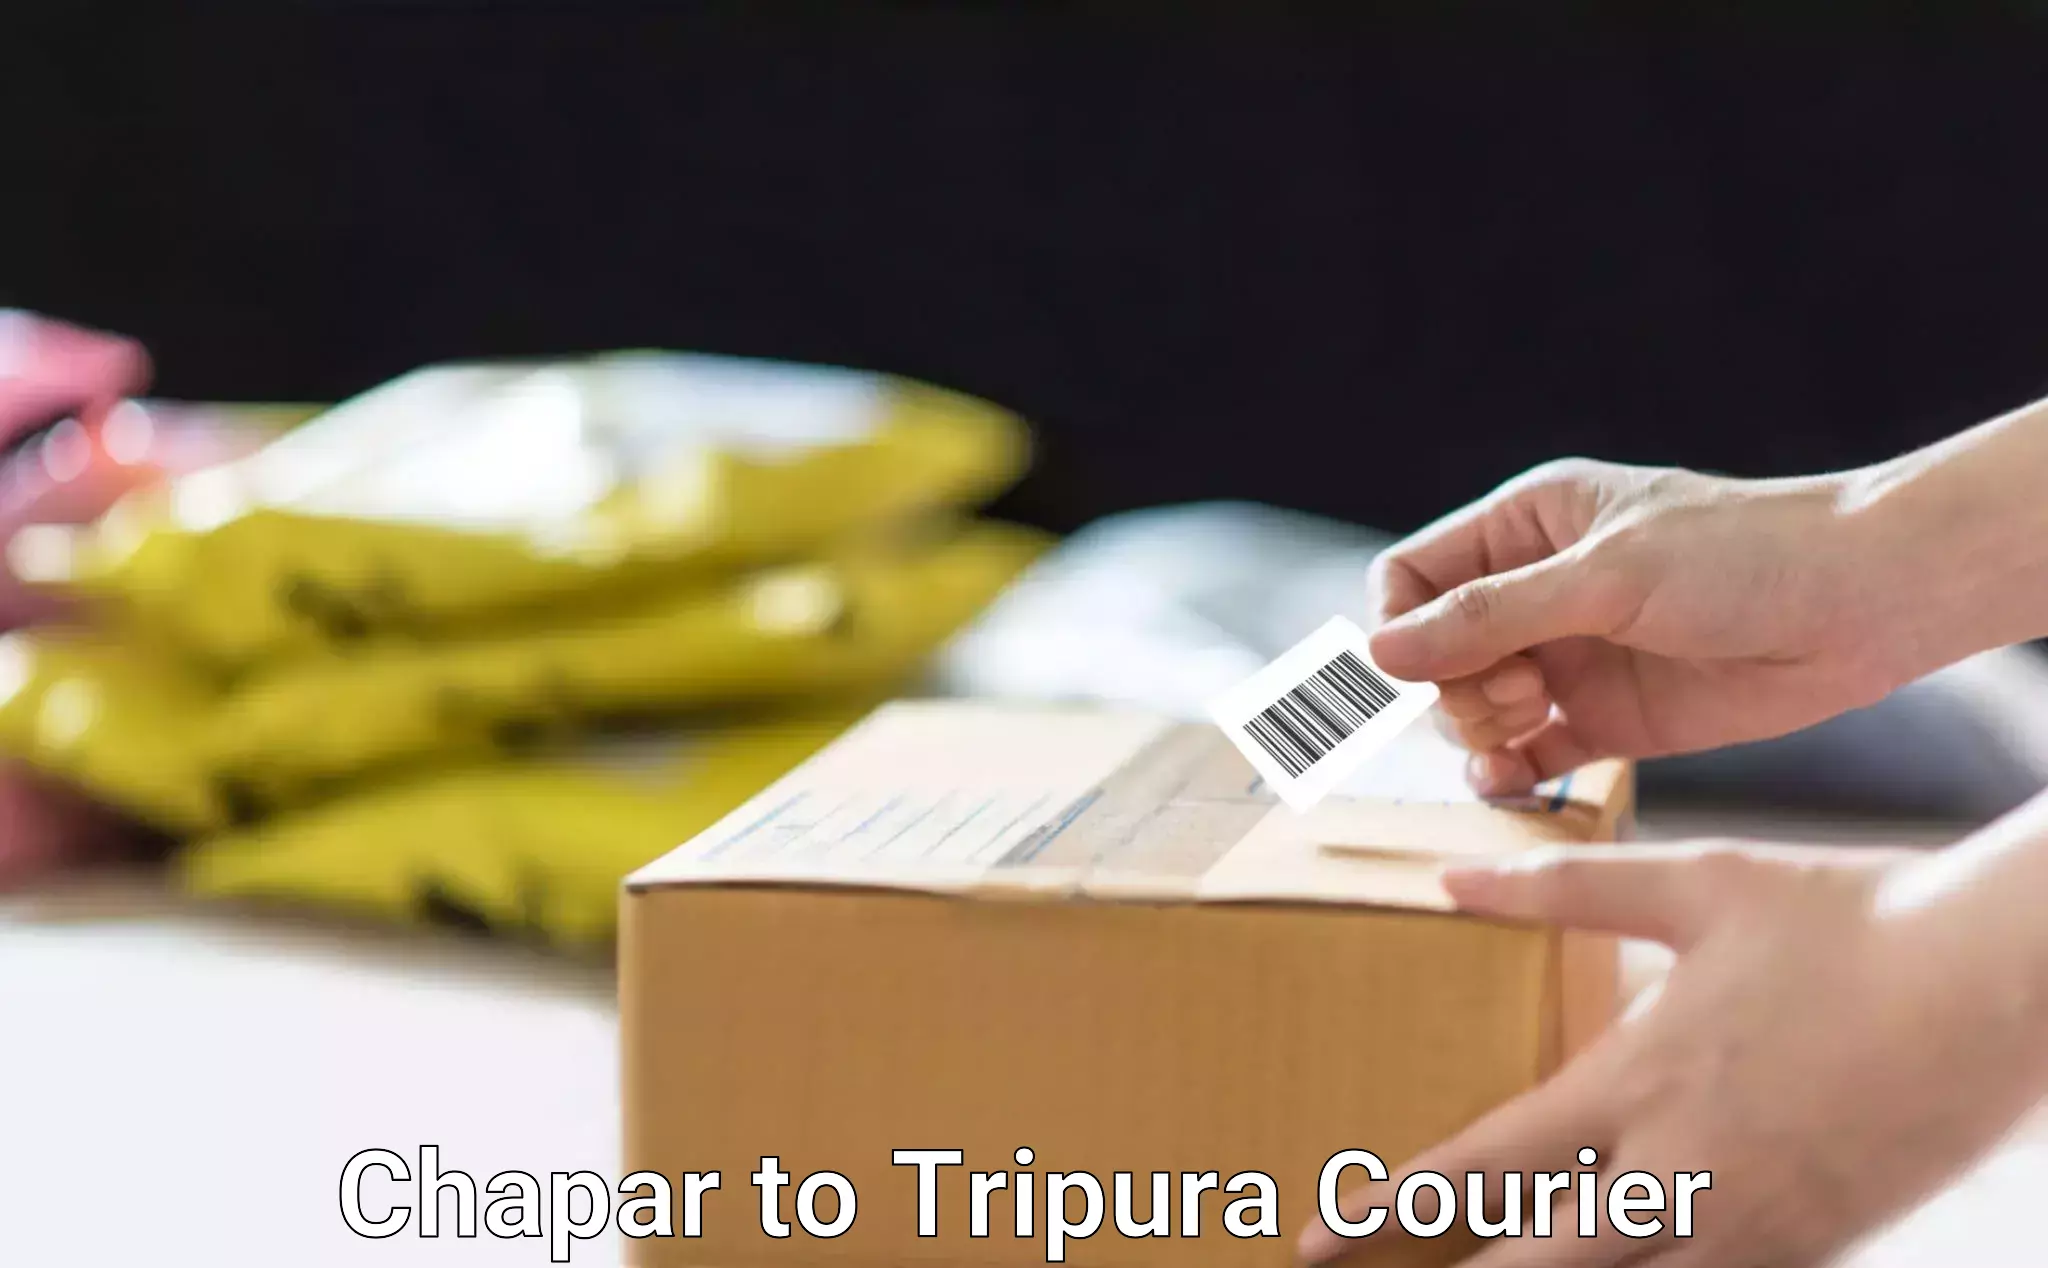 Efficient shipping operations Chapar to Udaipur Tripura